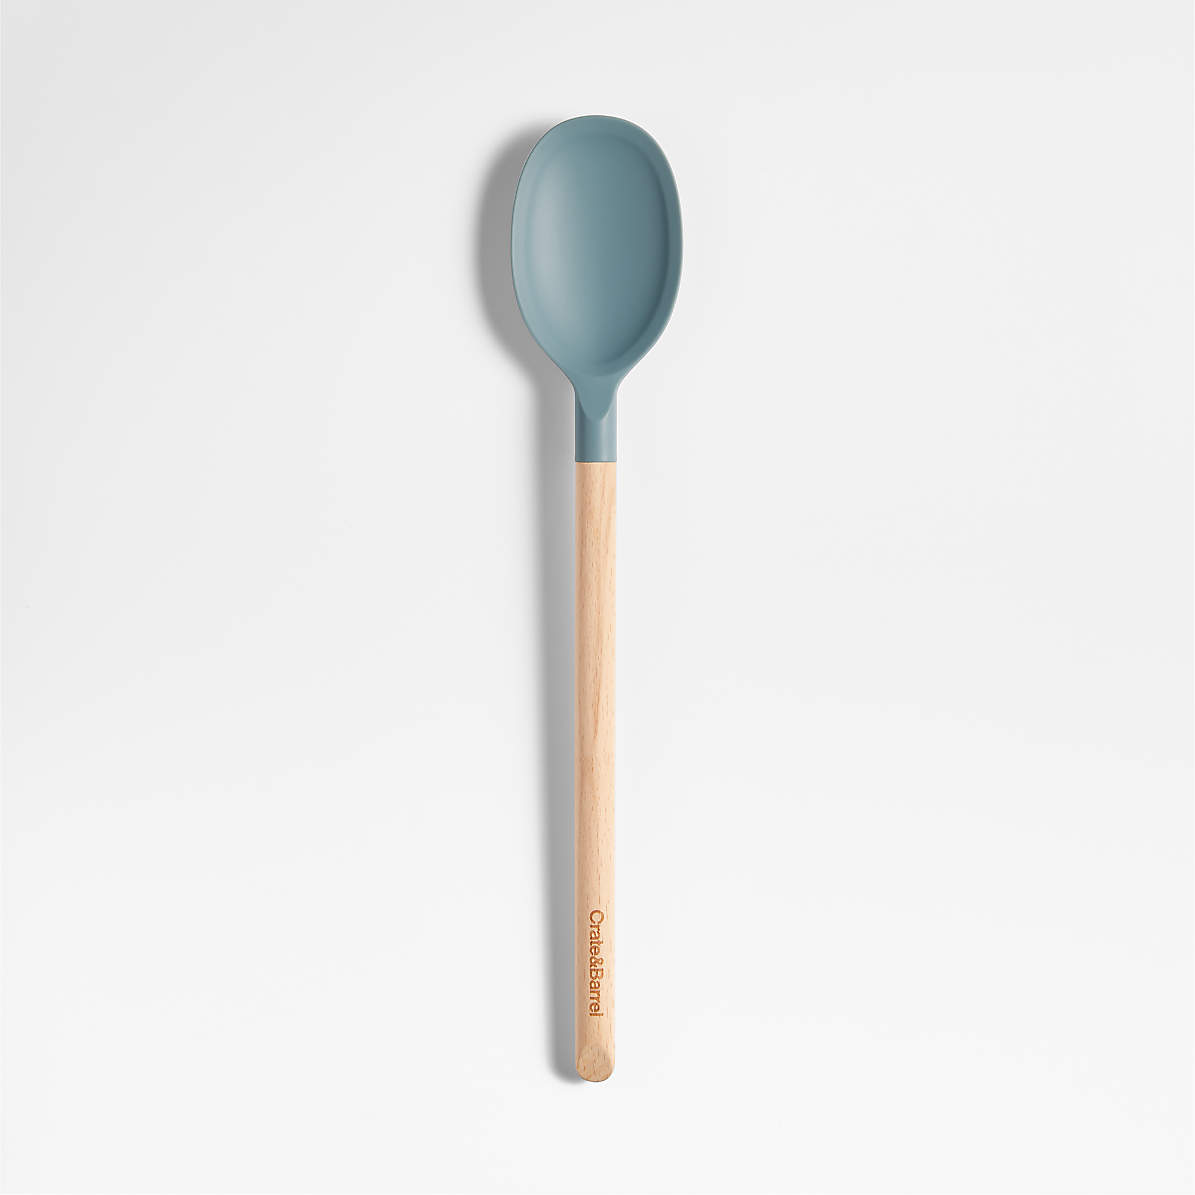 Crate & Barrel Sage Green Silicone & Wood Utensils